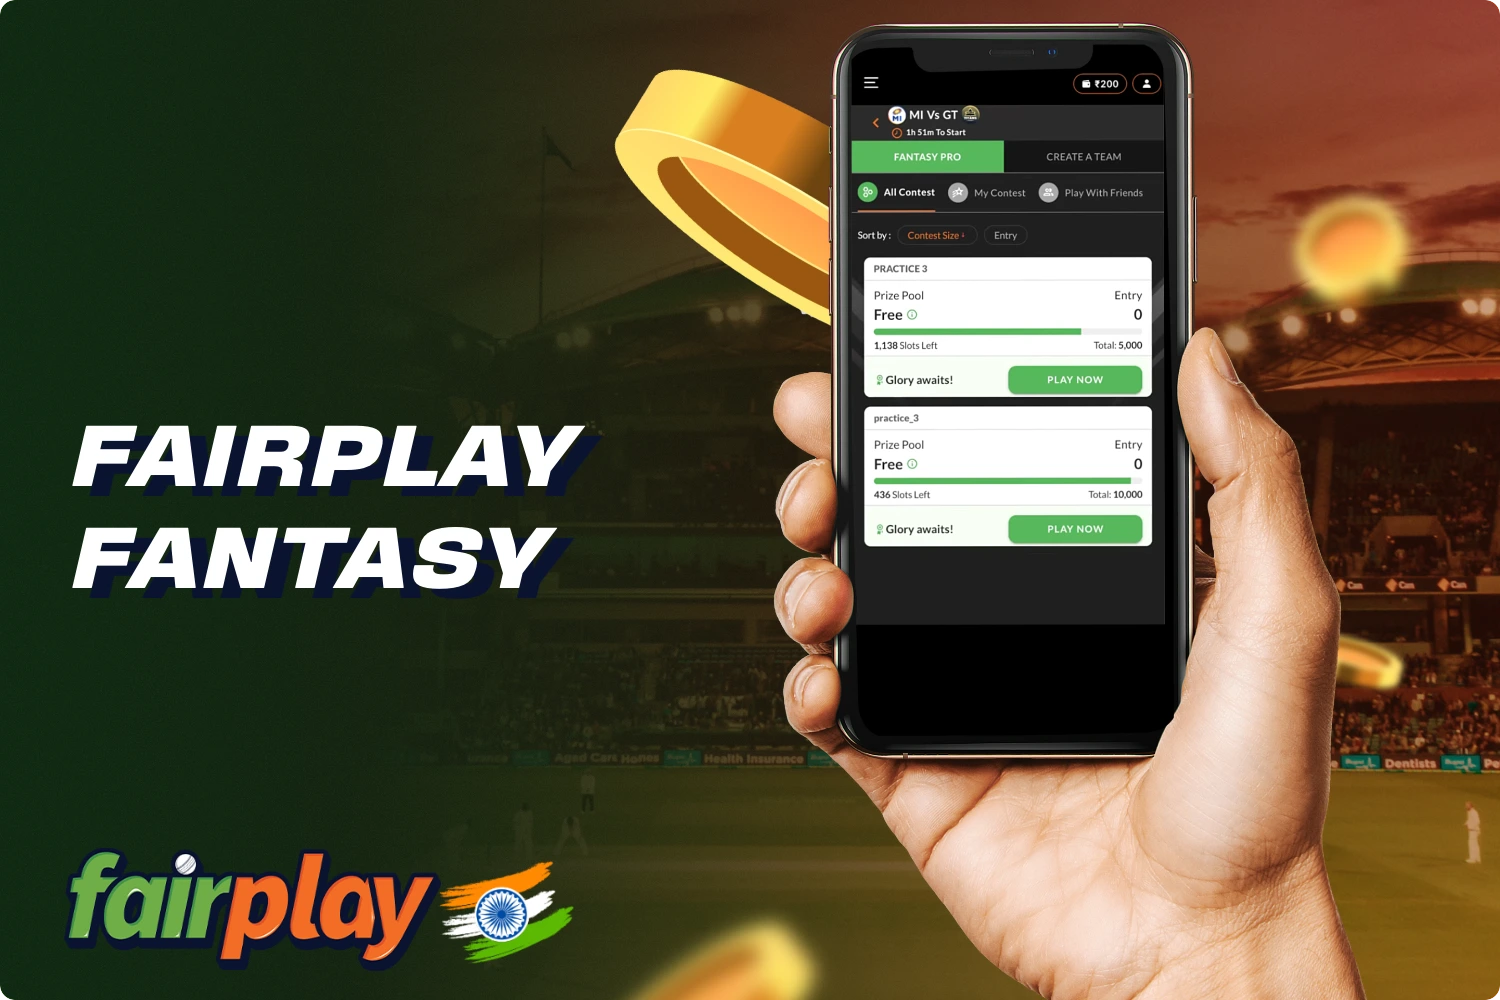 Fairplay Fantasy is a special place where users from India can bet on fantasy sports